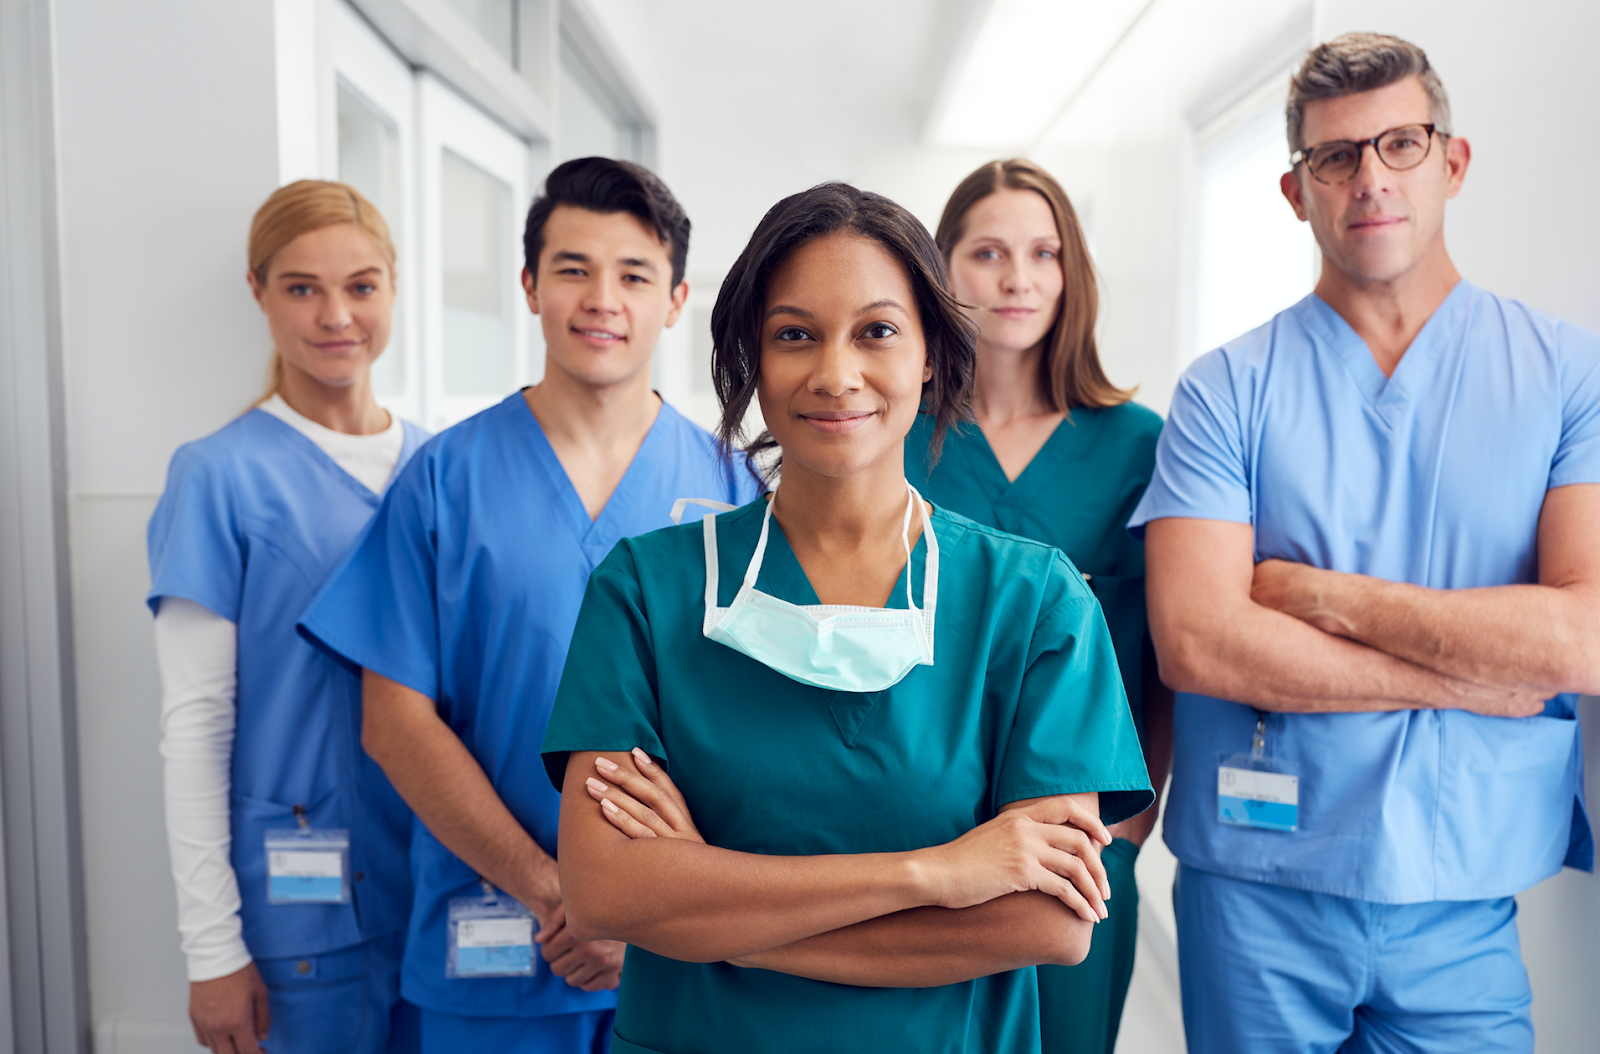 Indeed, the US official recognition of nursing as a STEM career may raise funds for the nursing field and broaden the range of career options for nurses in other sectors.